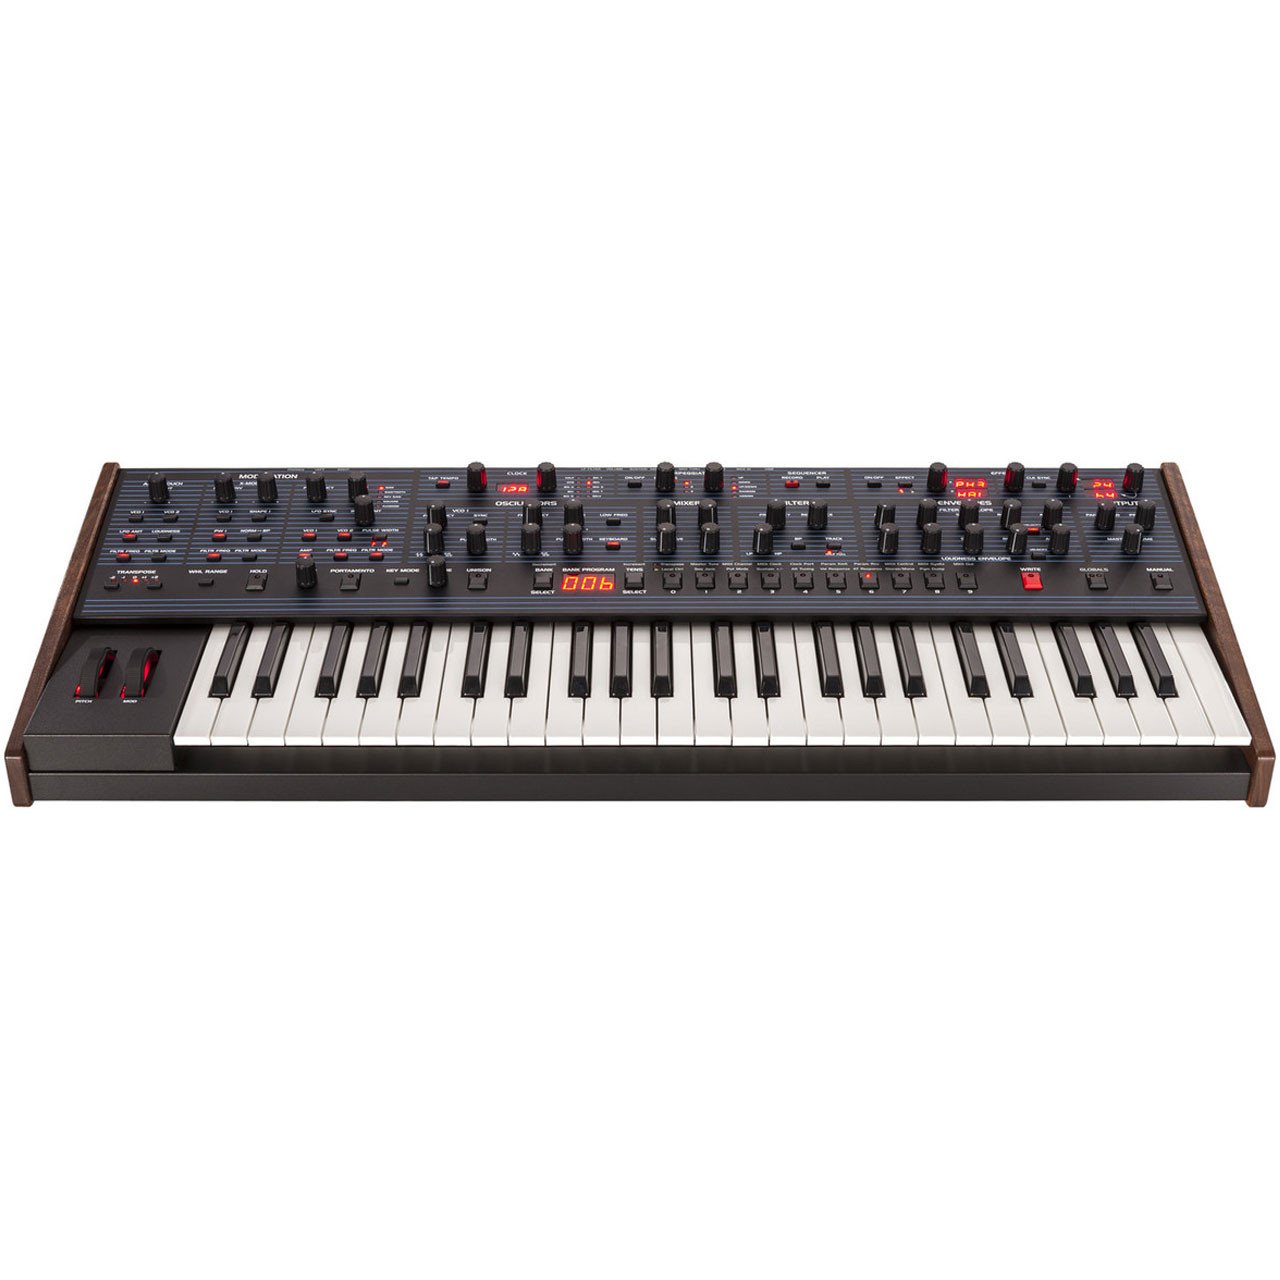 Keyboard Synthesizers - Dave Smith Instruments OB-6 - 6-Voice Polyphonic Analog Synthesizer